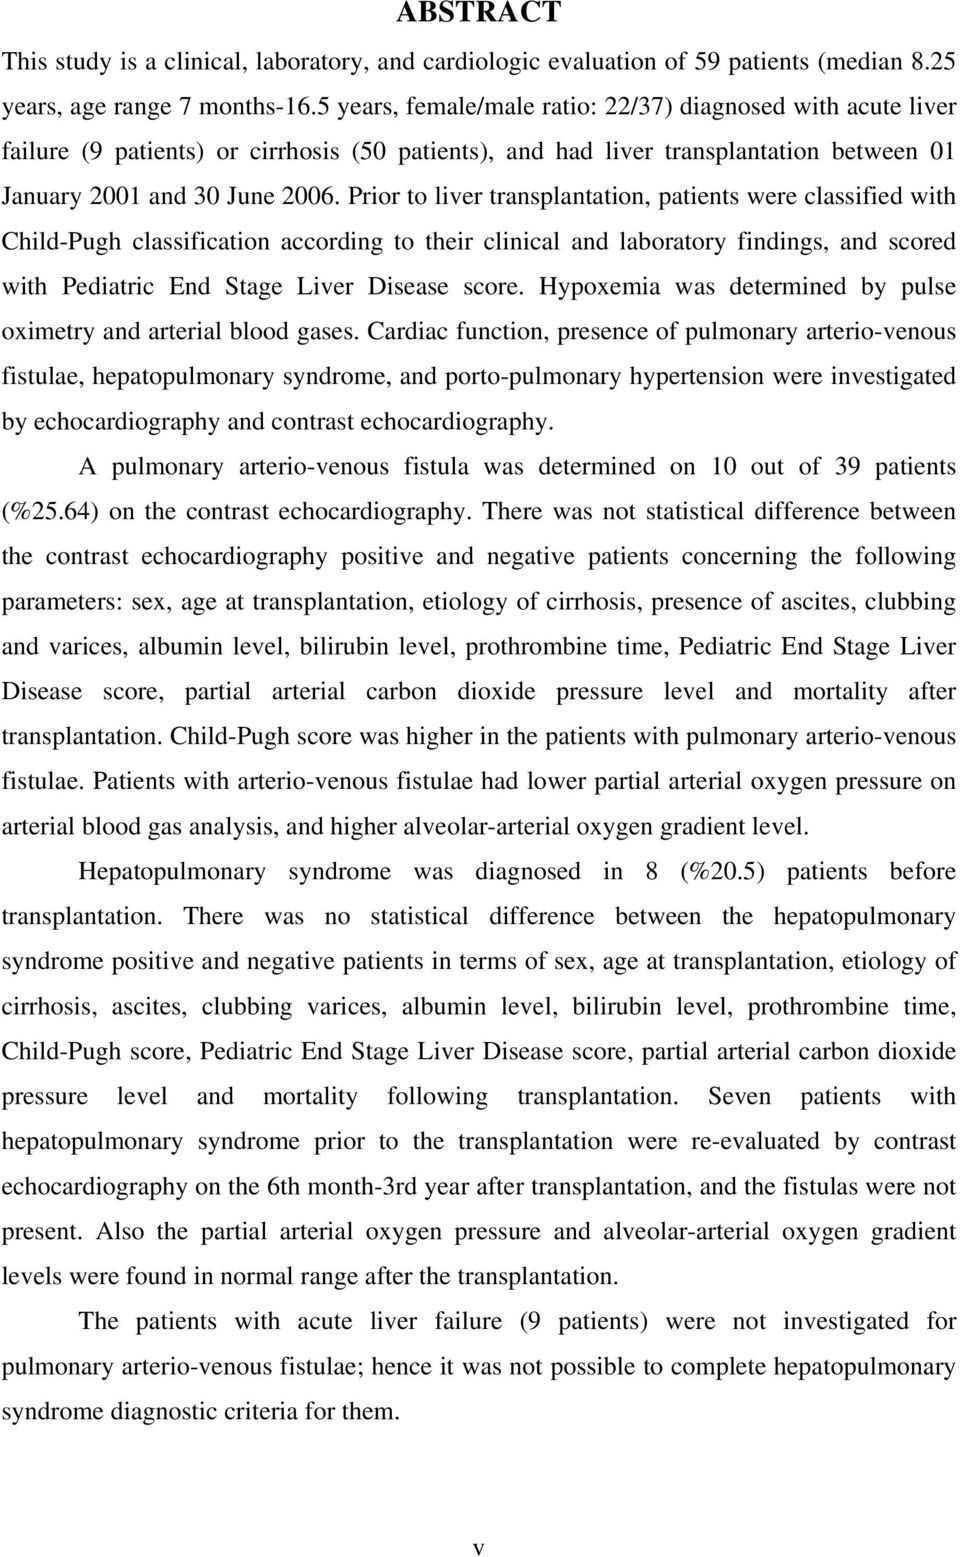 Prior to liver transplantation, patients were classified with Child-Pugh classification according to their clinical and laboratory findings, and scored with Pediatric End Stage Liver Disease score.